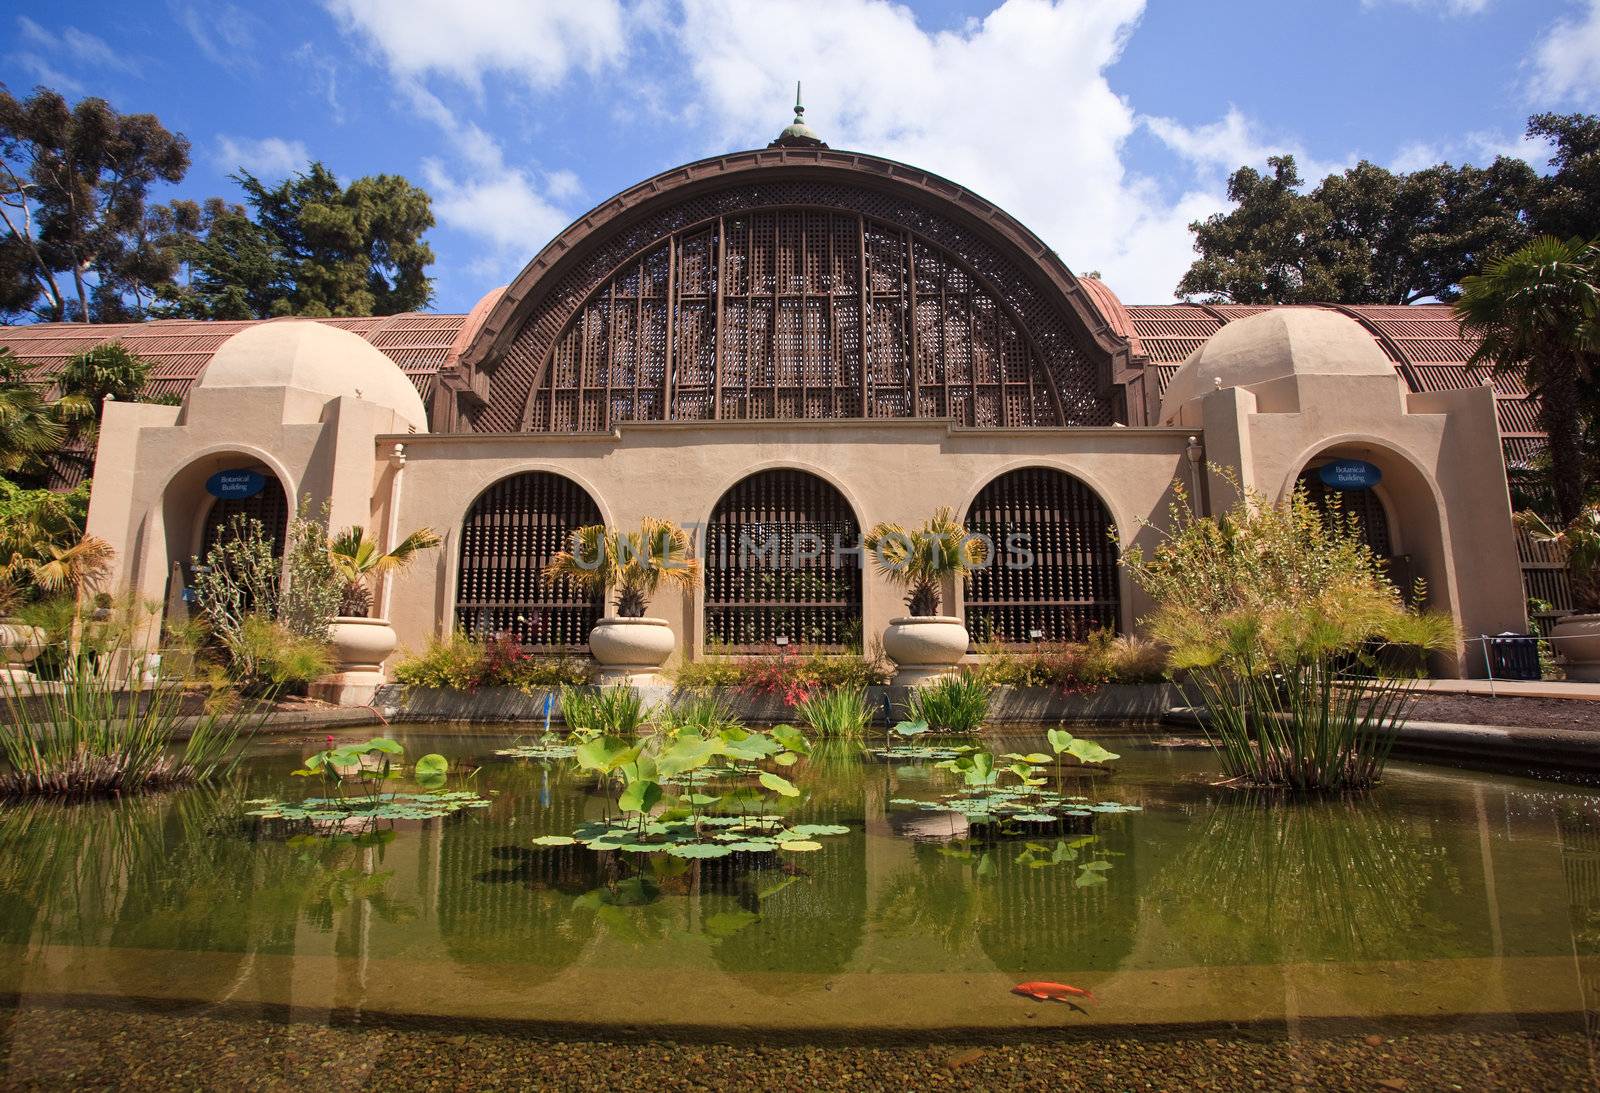 Botanical Building in Balboa Park in San Diego by steheap